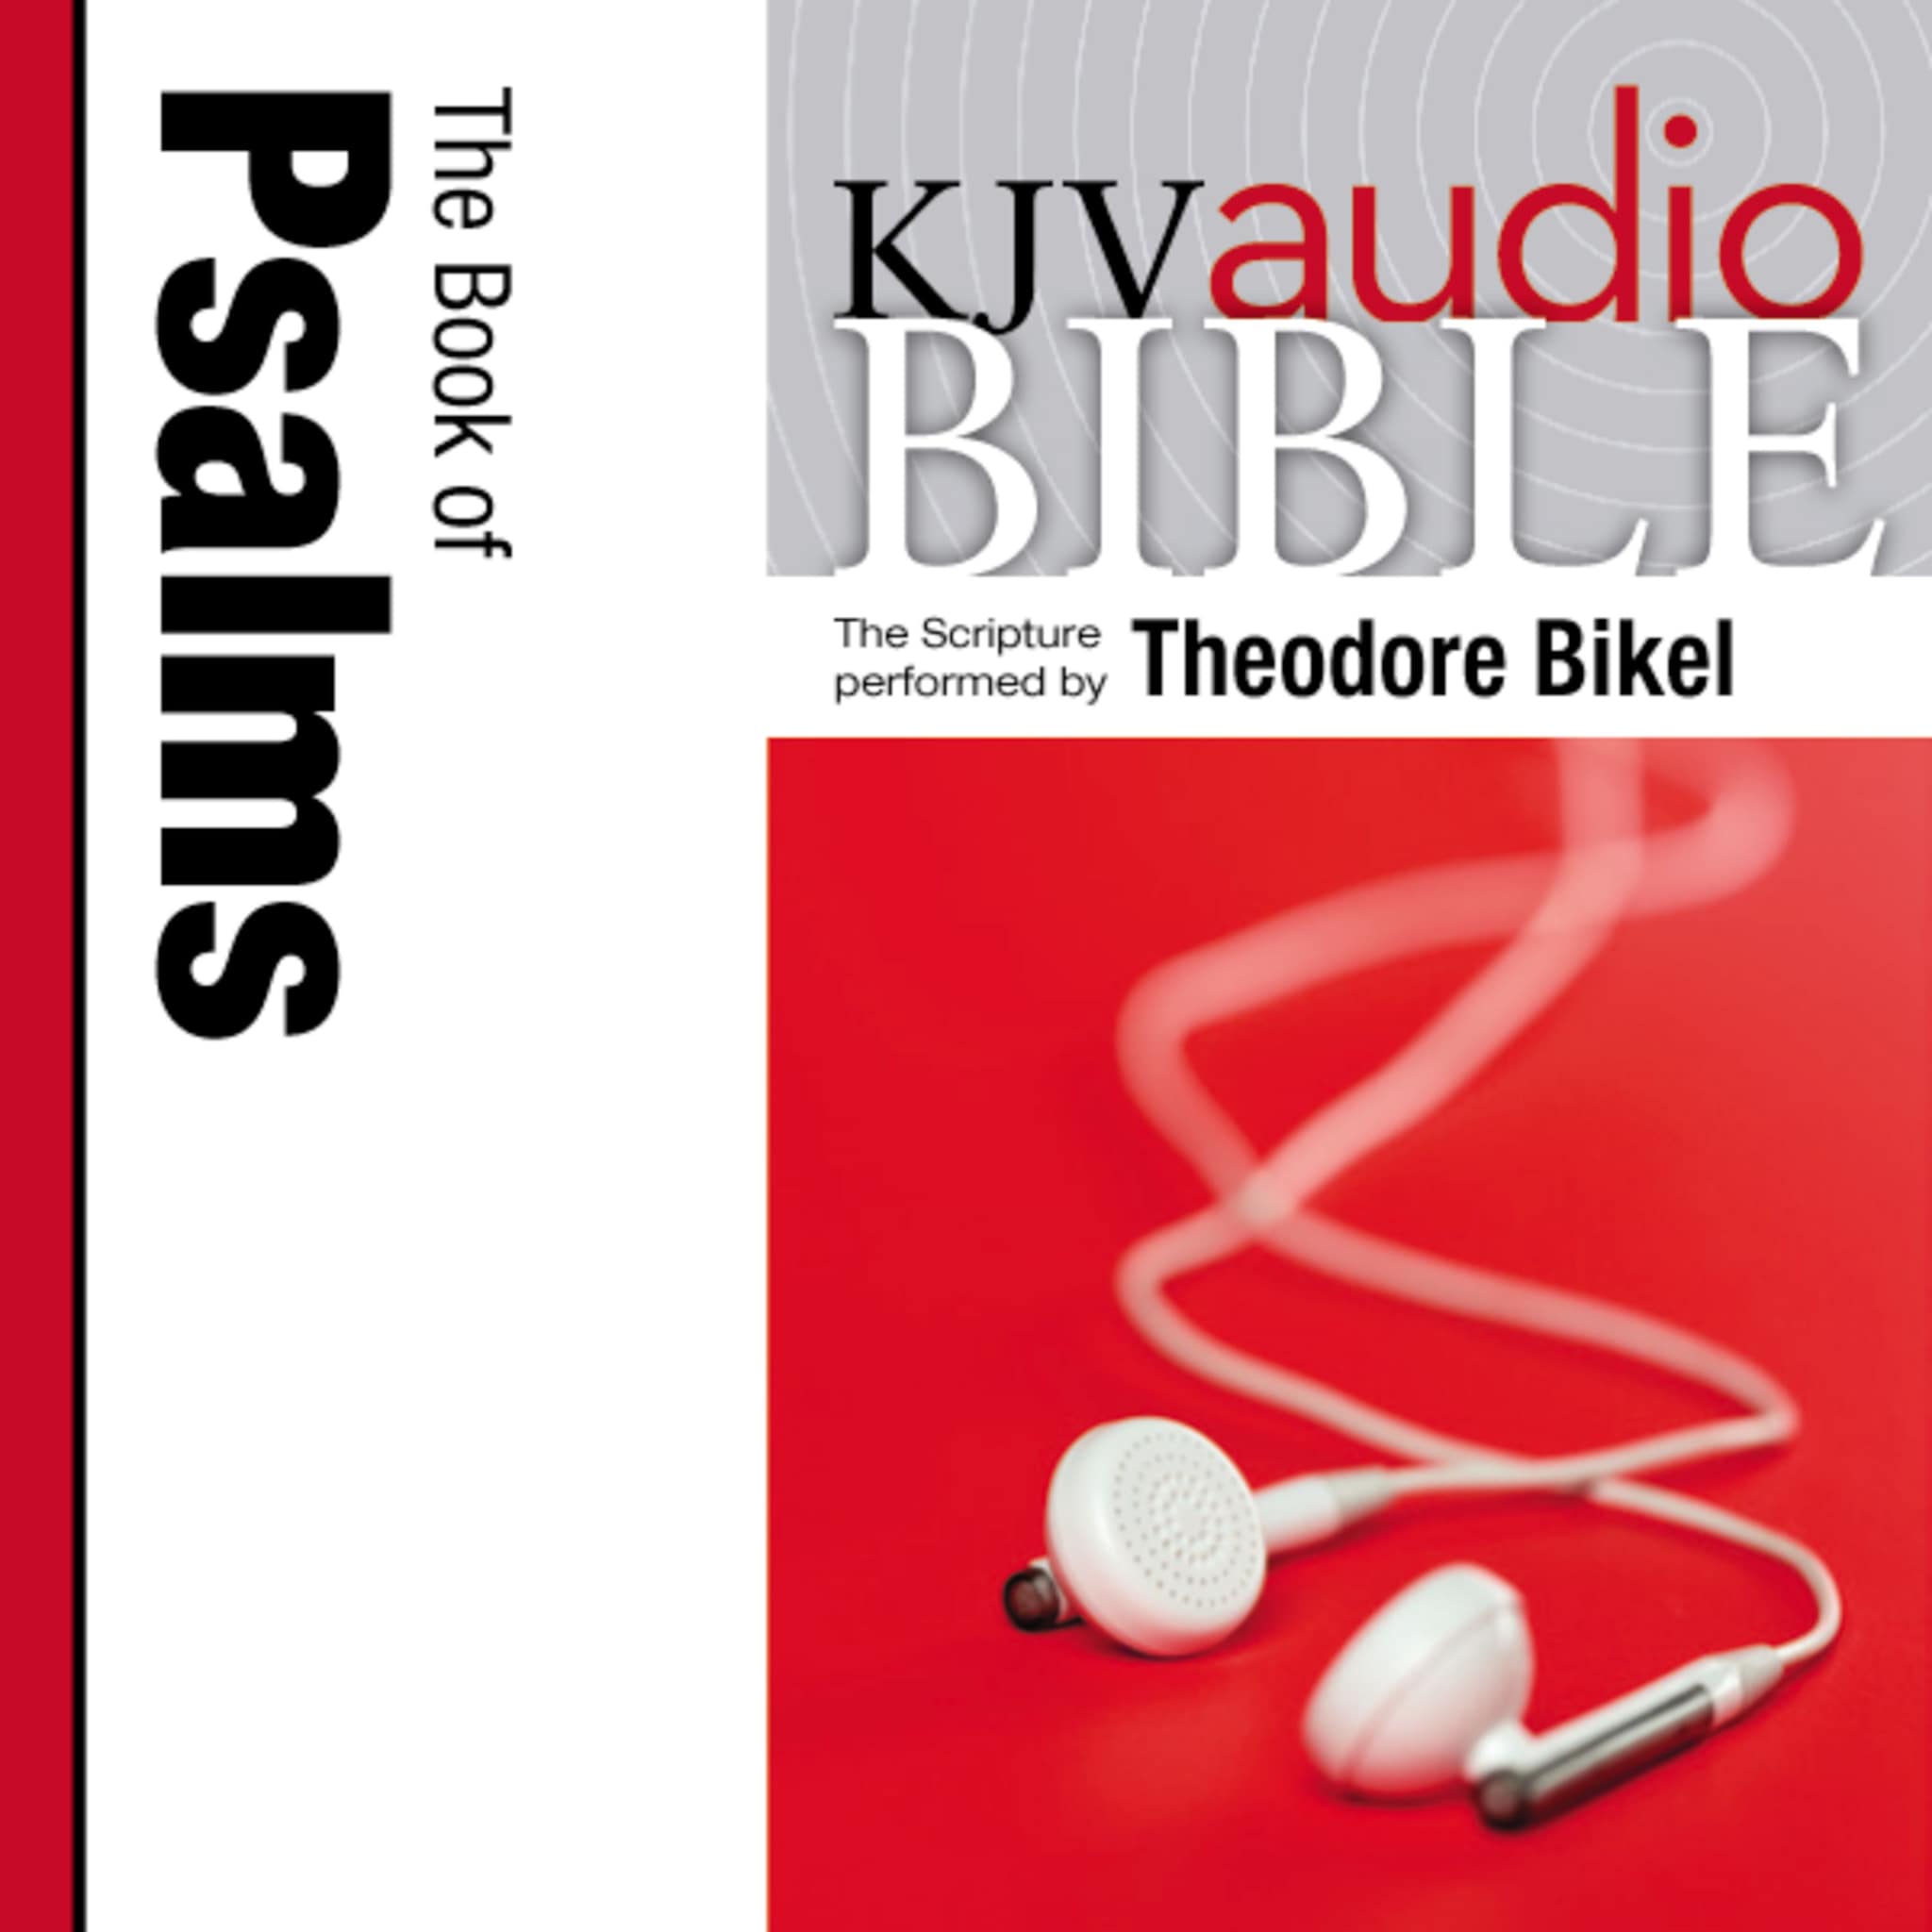 king james pure bible search for windows 10